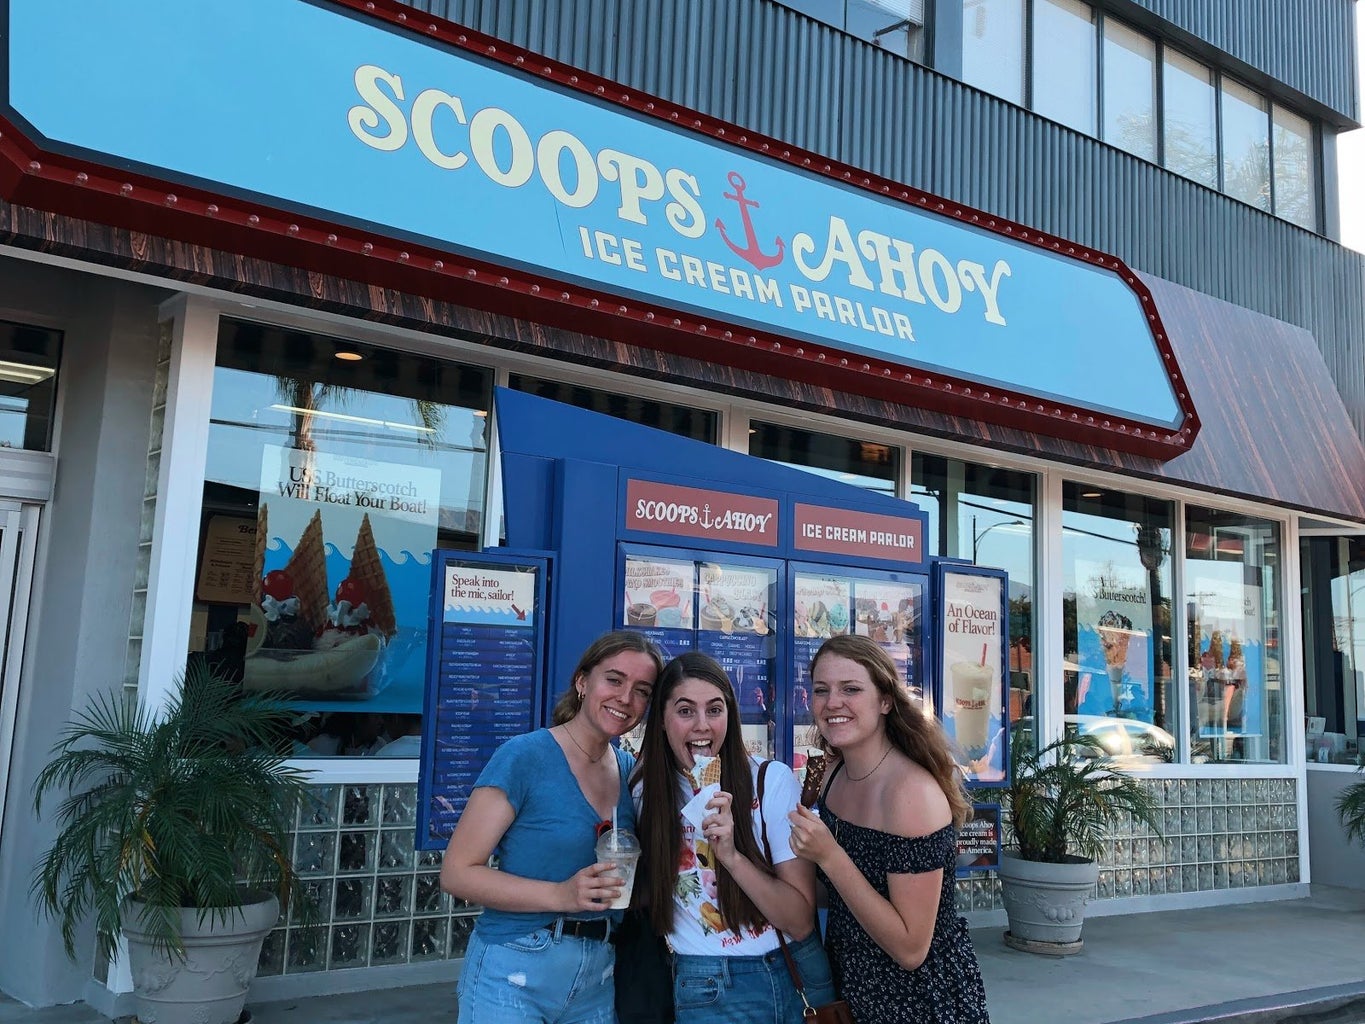 Me and my two friends outside Scoops Ahoy